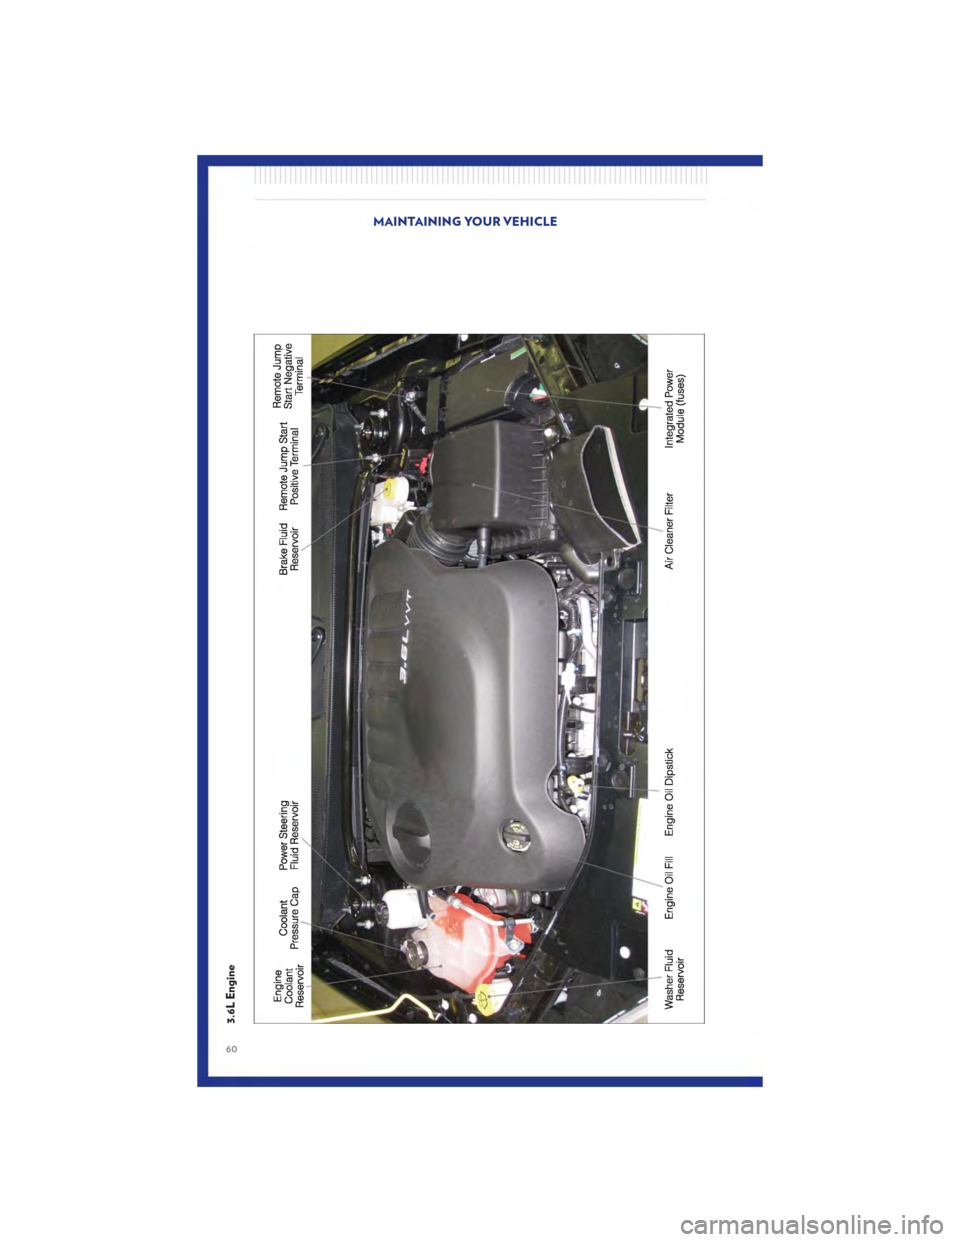 CHRYSLER 200 2011 1.G Owners Manual 3.6L Engine
MAINTAINING YOUR VEHICLE
60 